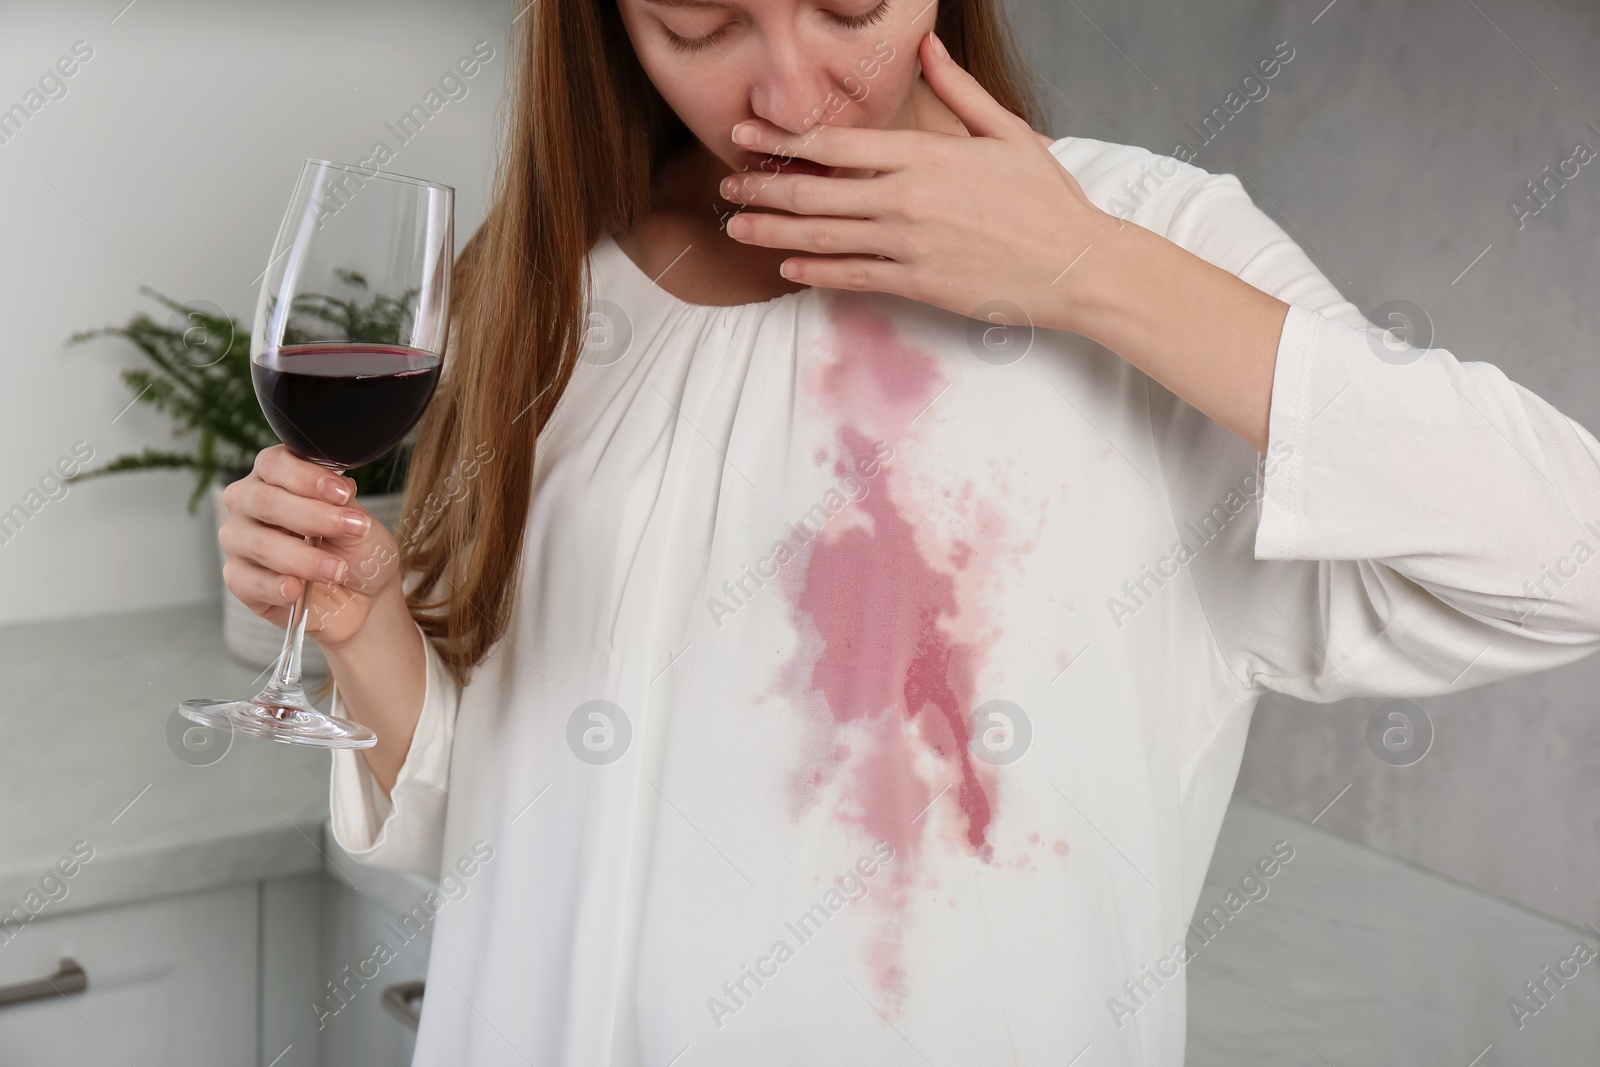 Photo of Embarrassed woman with wine stain on her clothes and glass of wine indoors